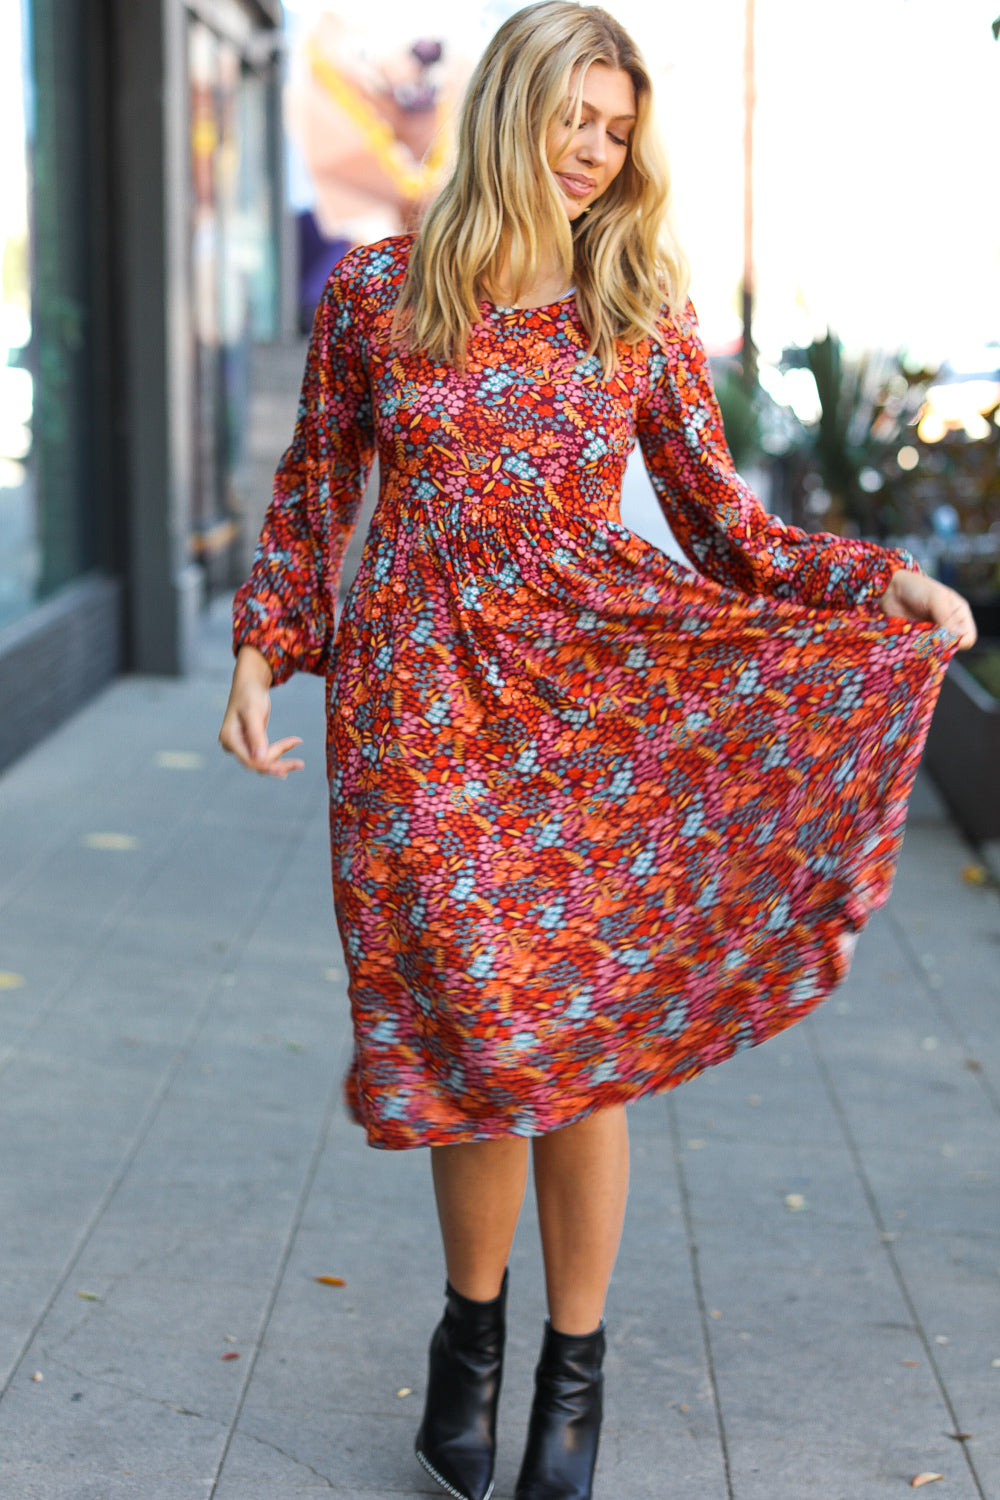 Just For Me Rust Ditzy Floral Fit & Flare Midi Dress